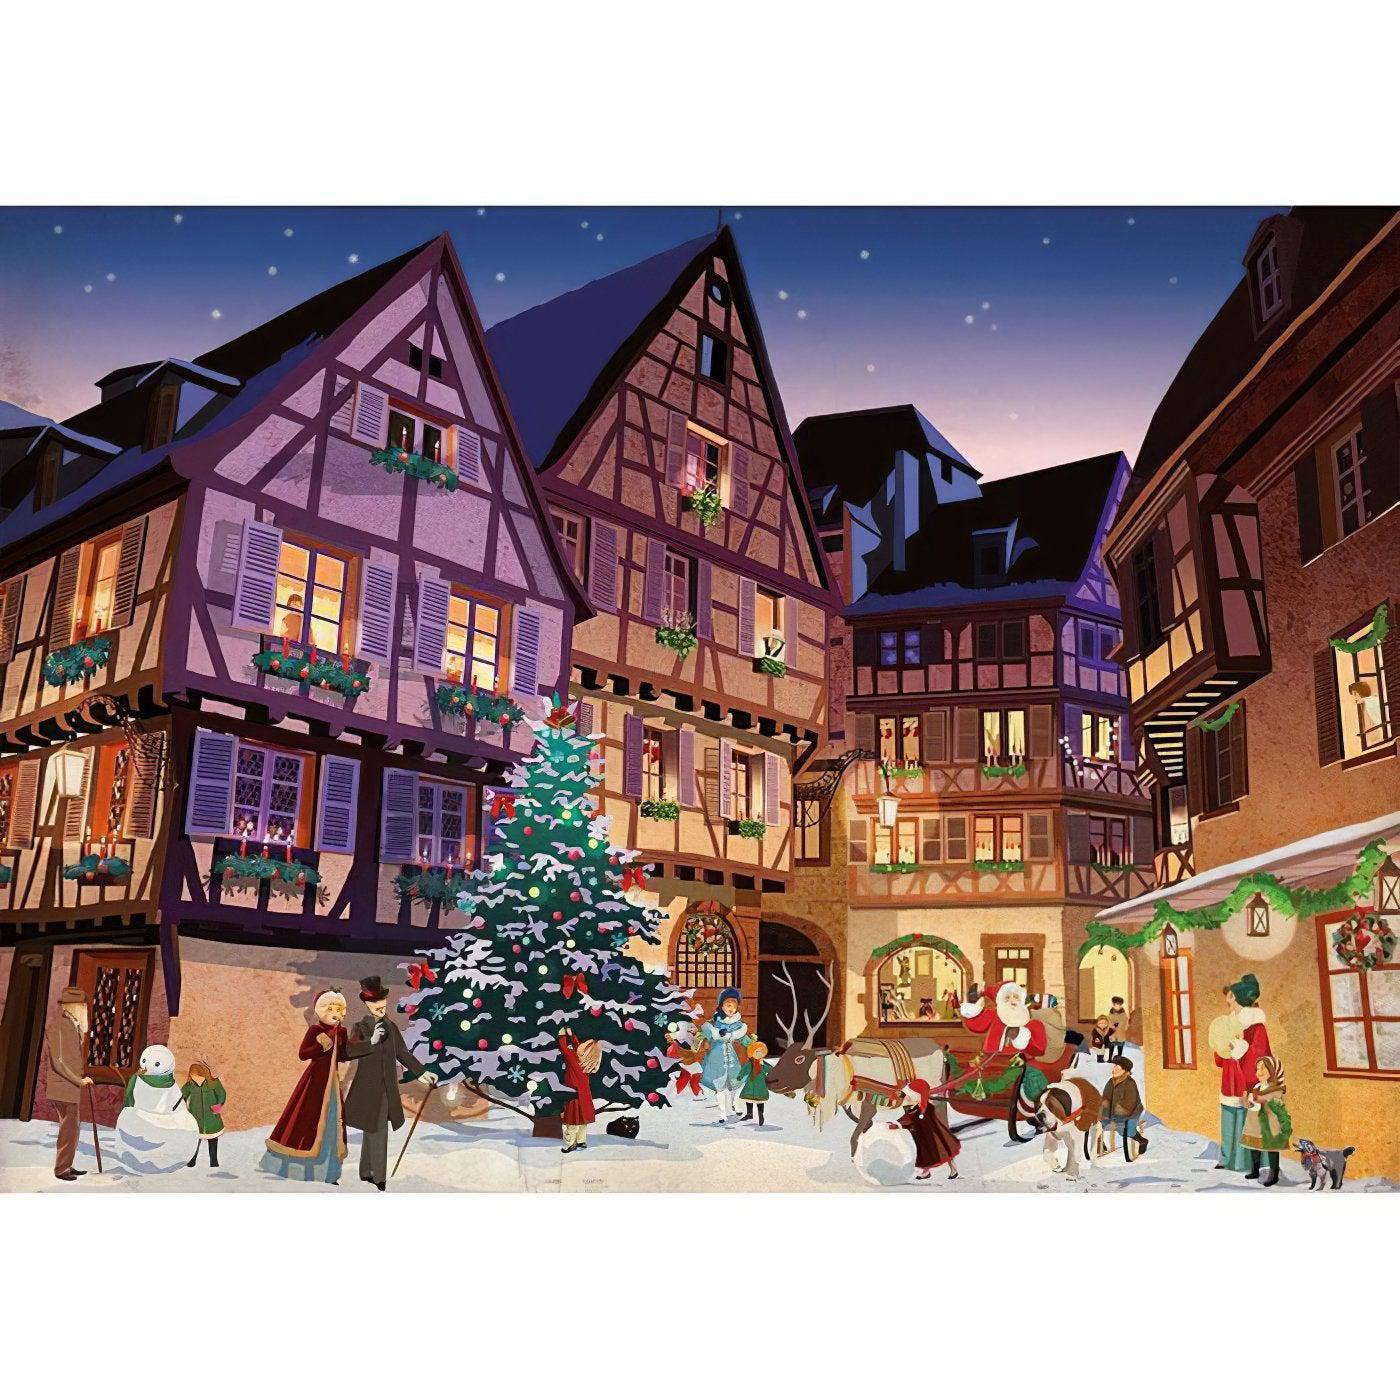 A small village nestled under the twinkling lights of a Christmas tree.Christmas Tree And Small Village - Diamondartlove